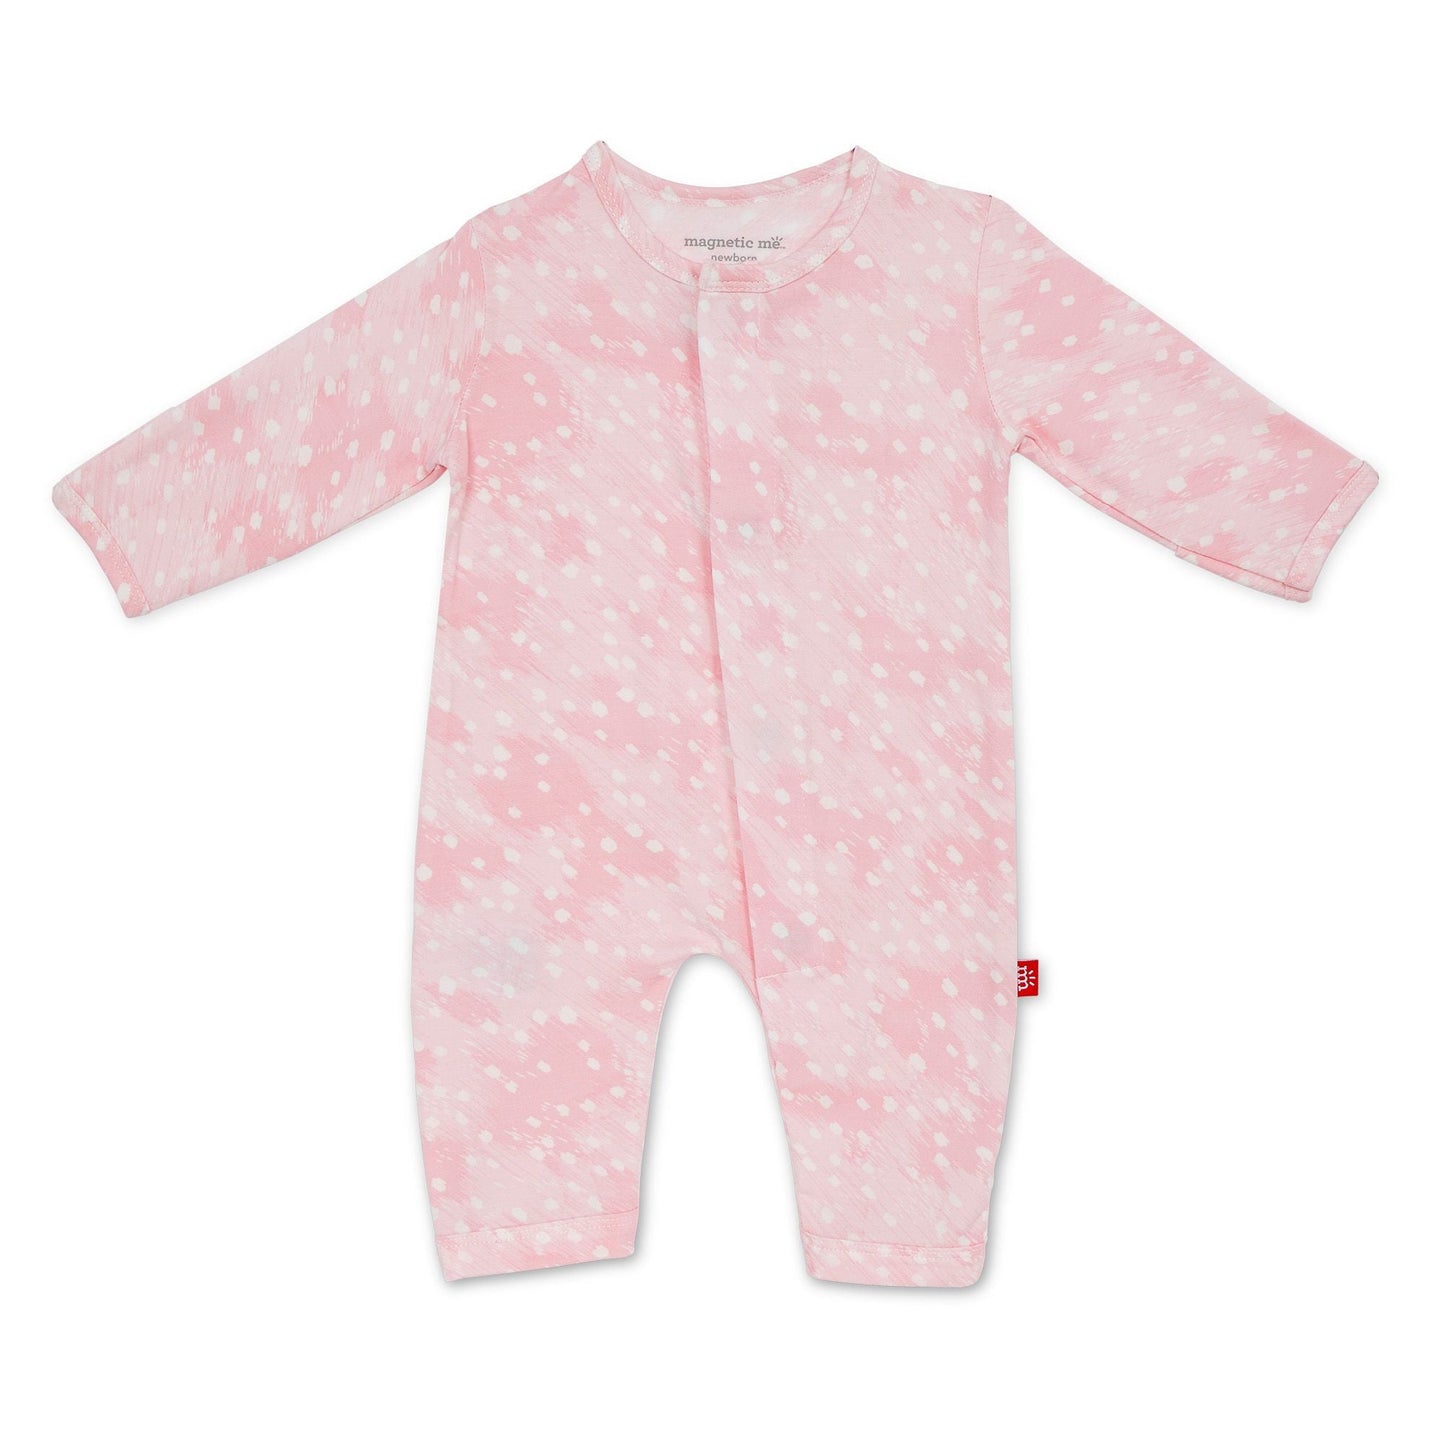 Modal Magnetic Coverall | Baby Shower Emily Gates